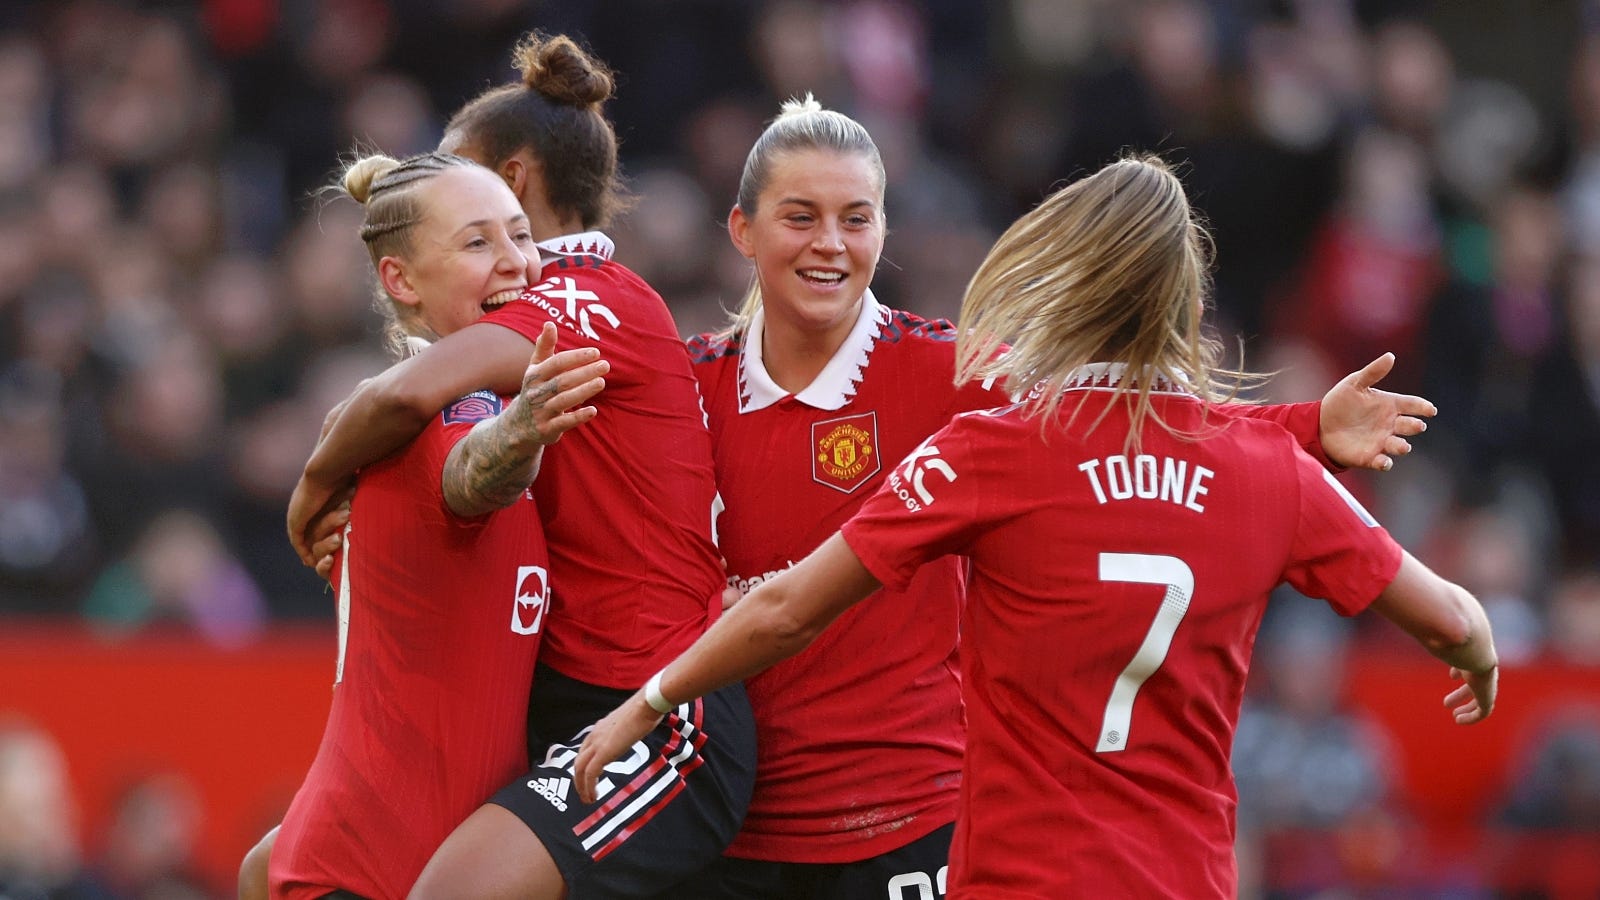 Aston Villa Women vs Manchester United Women Where to watch the match online, live stream, TV channels and kick-off time Goal US